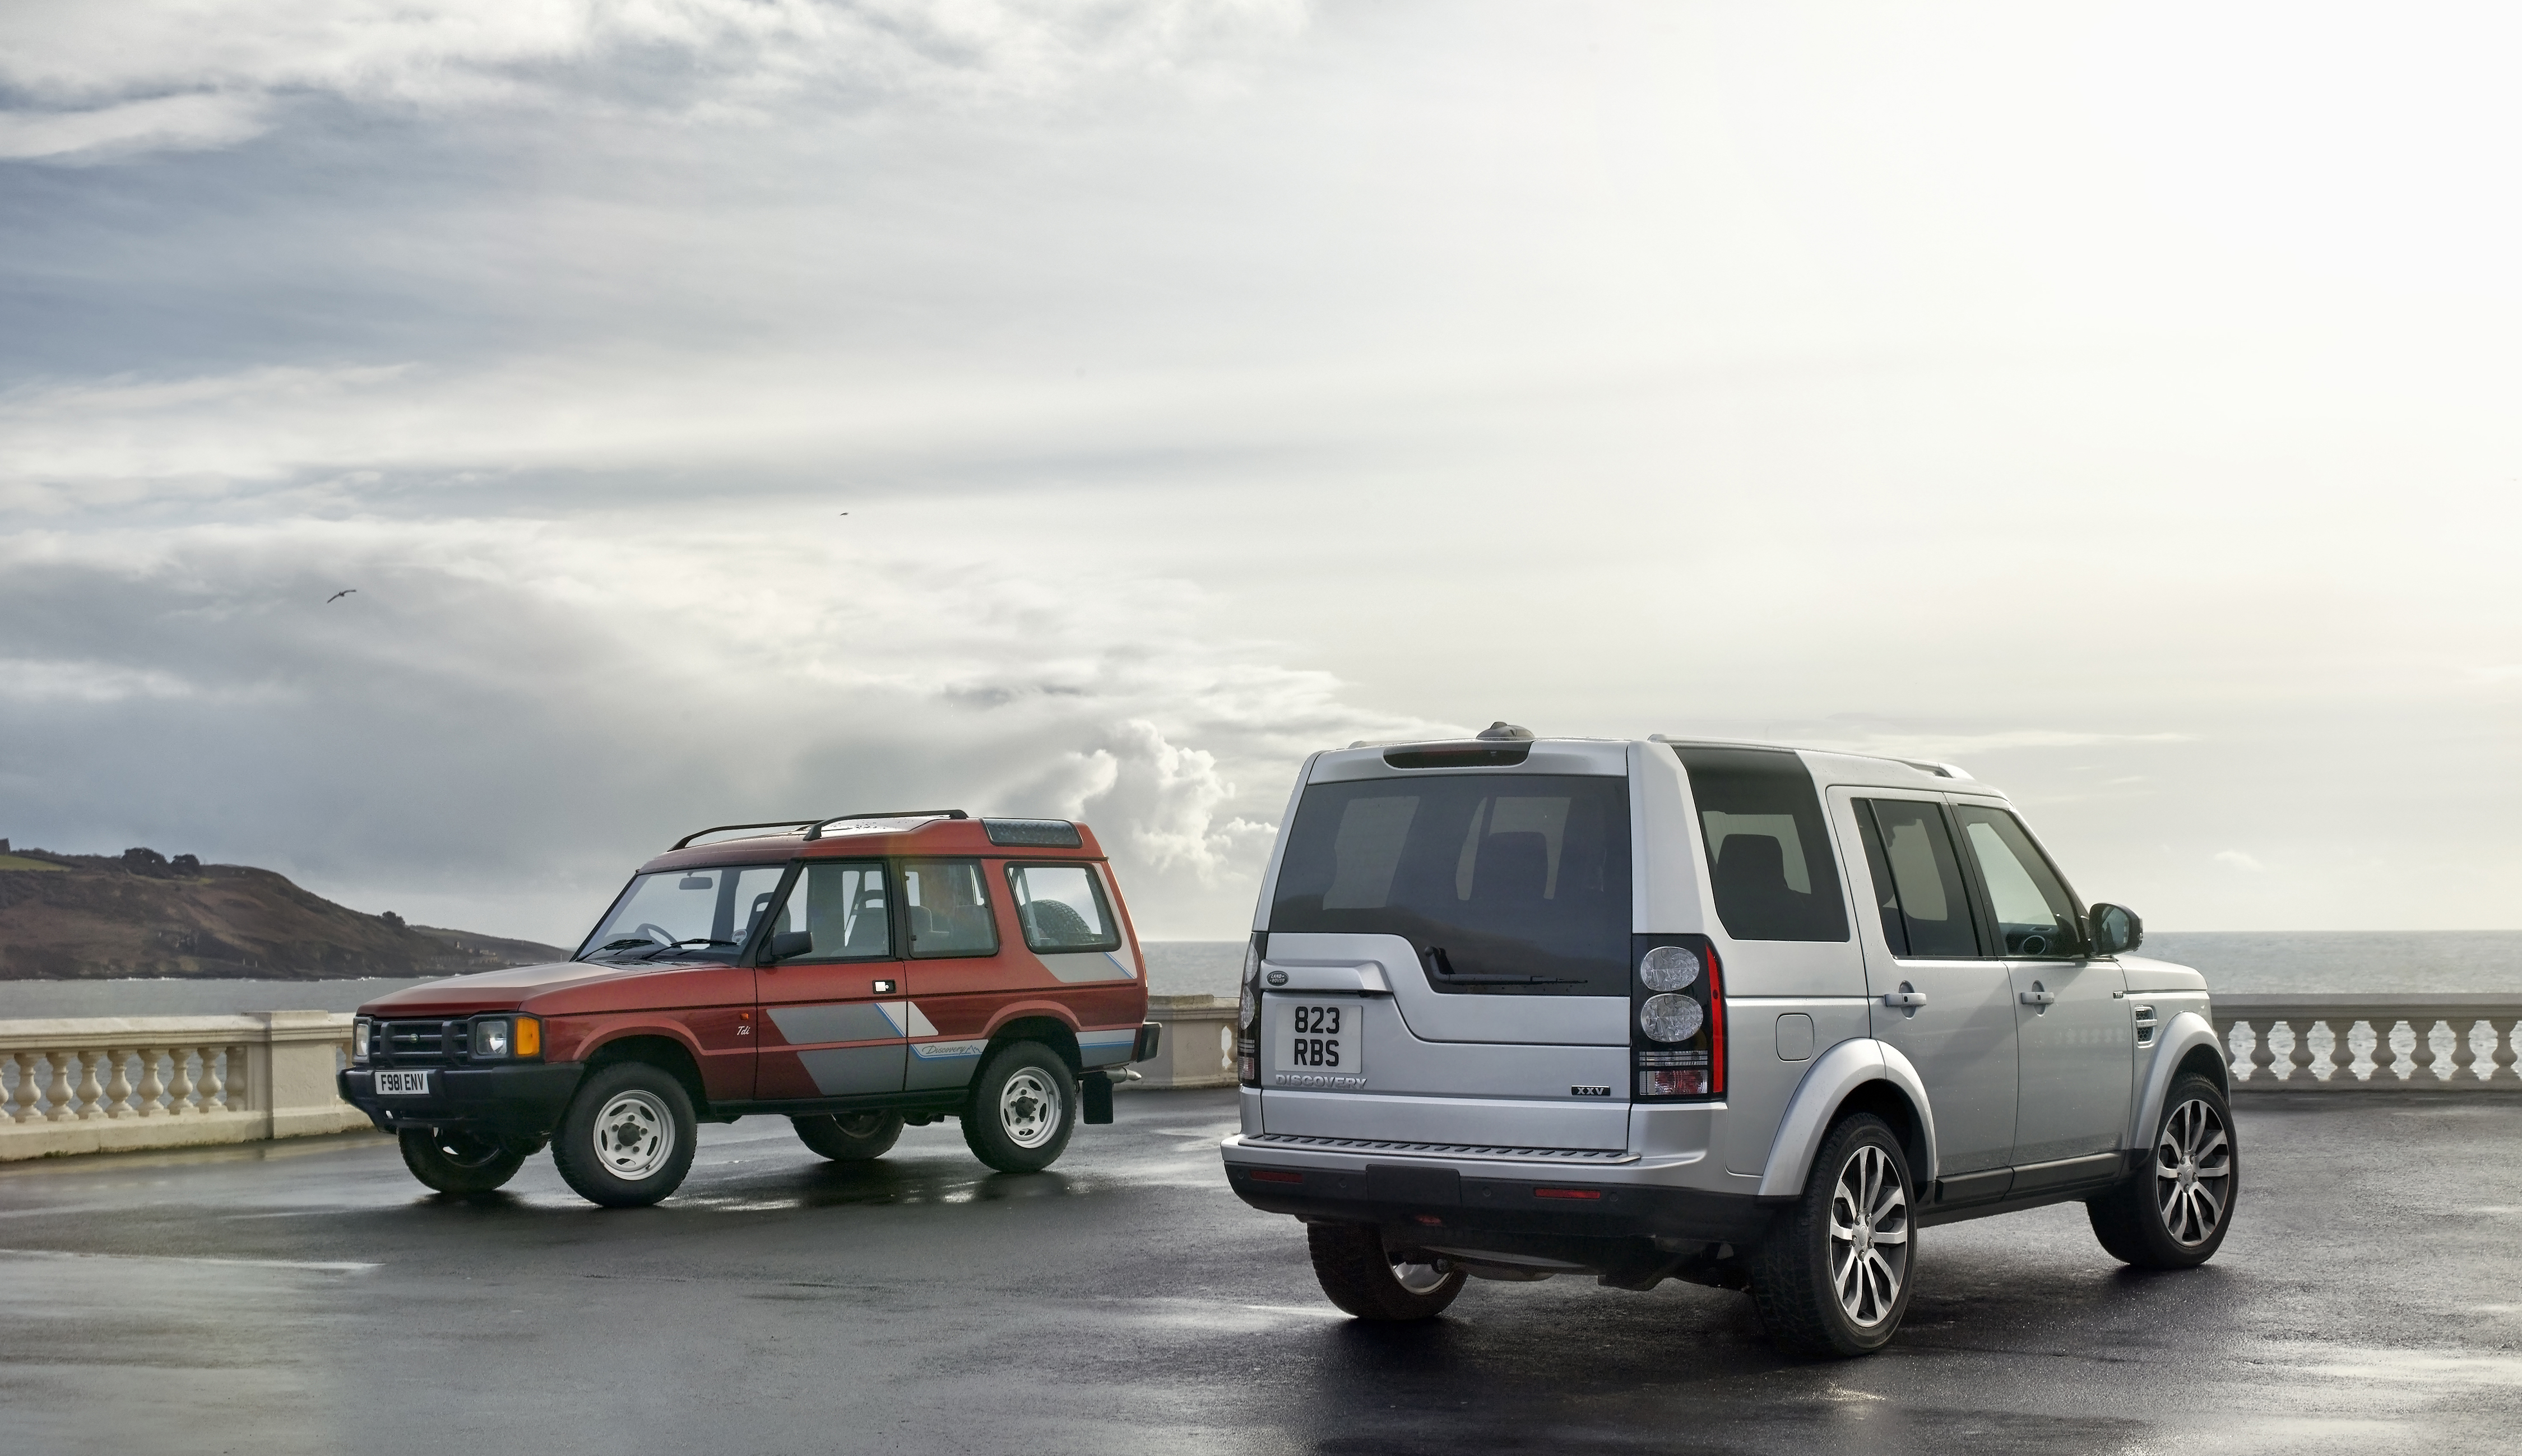 Vehicles Land Rover Discovery HD Wallpaper | Background Image